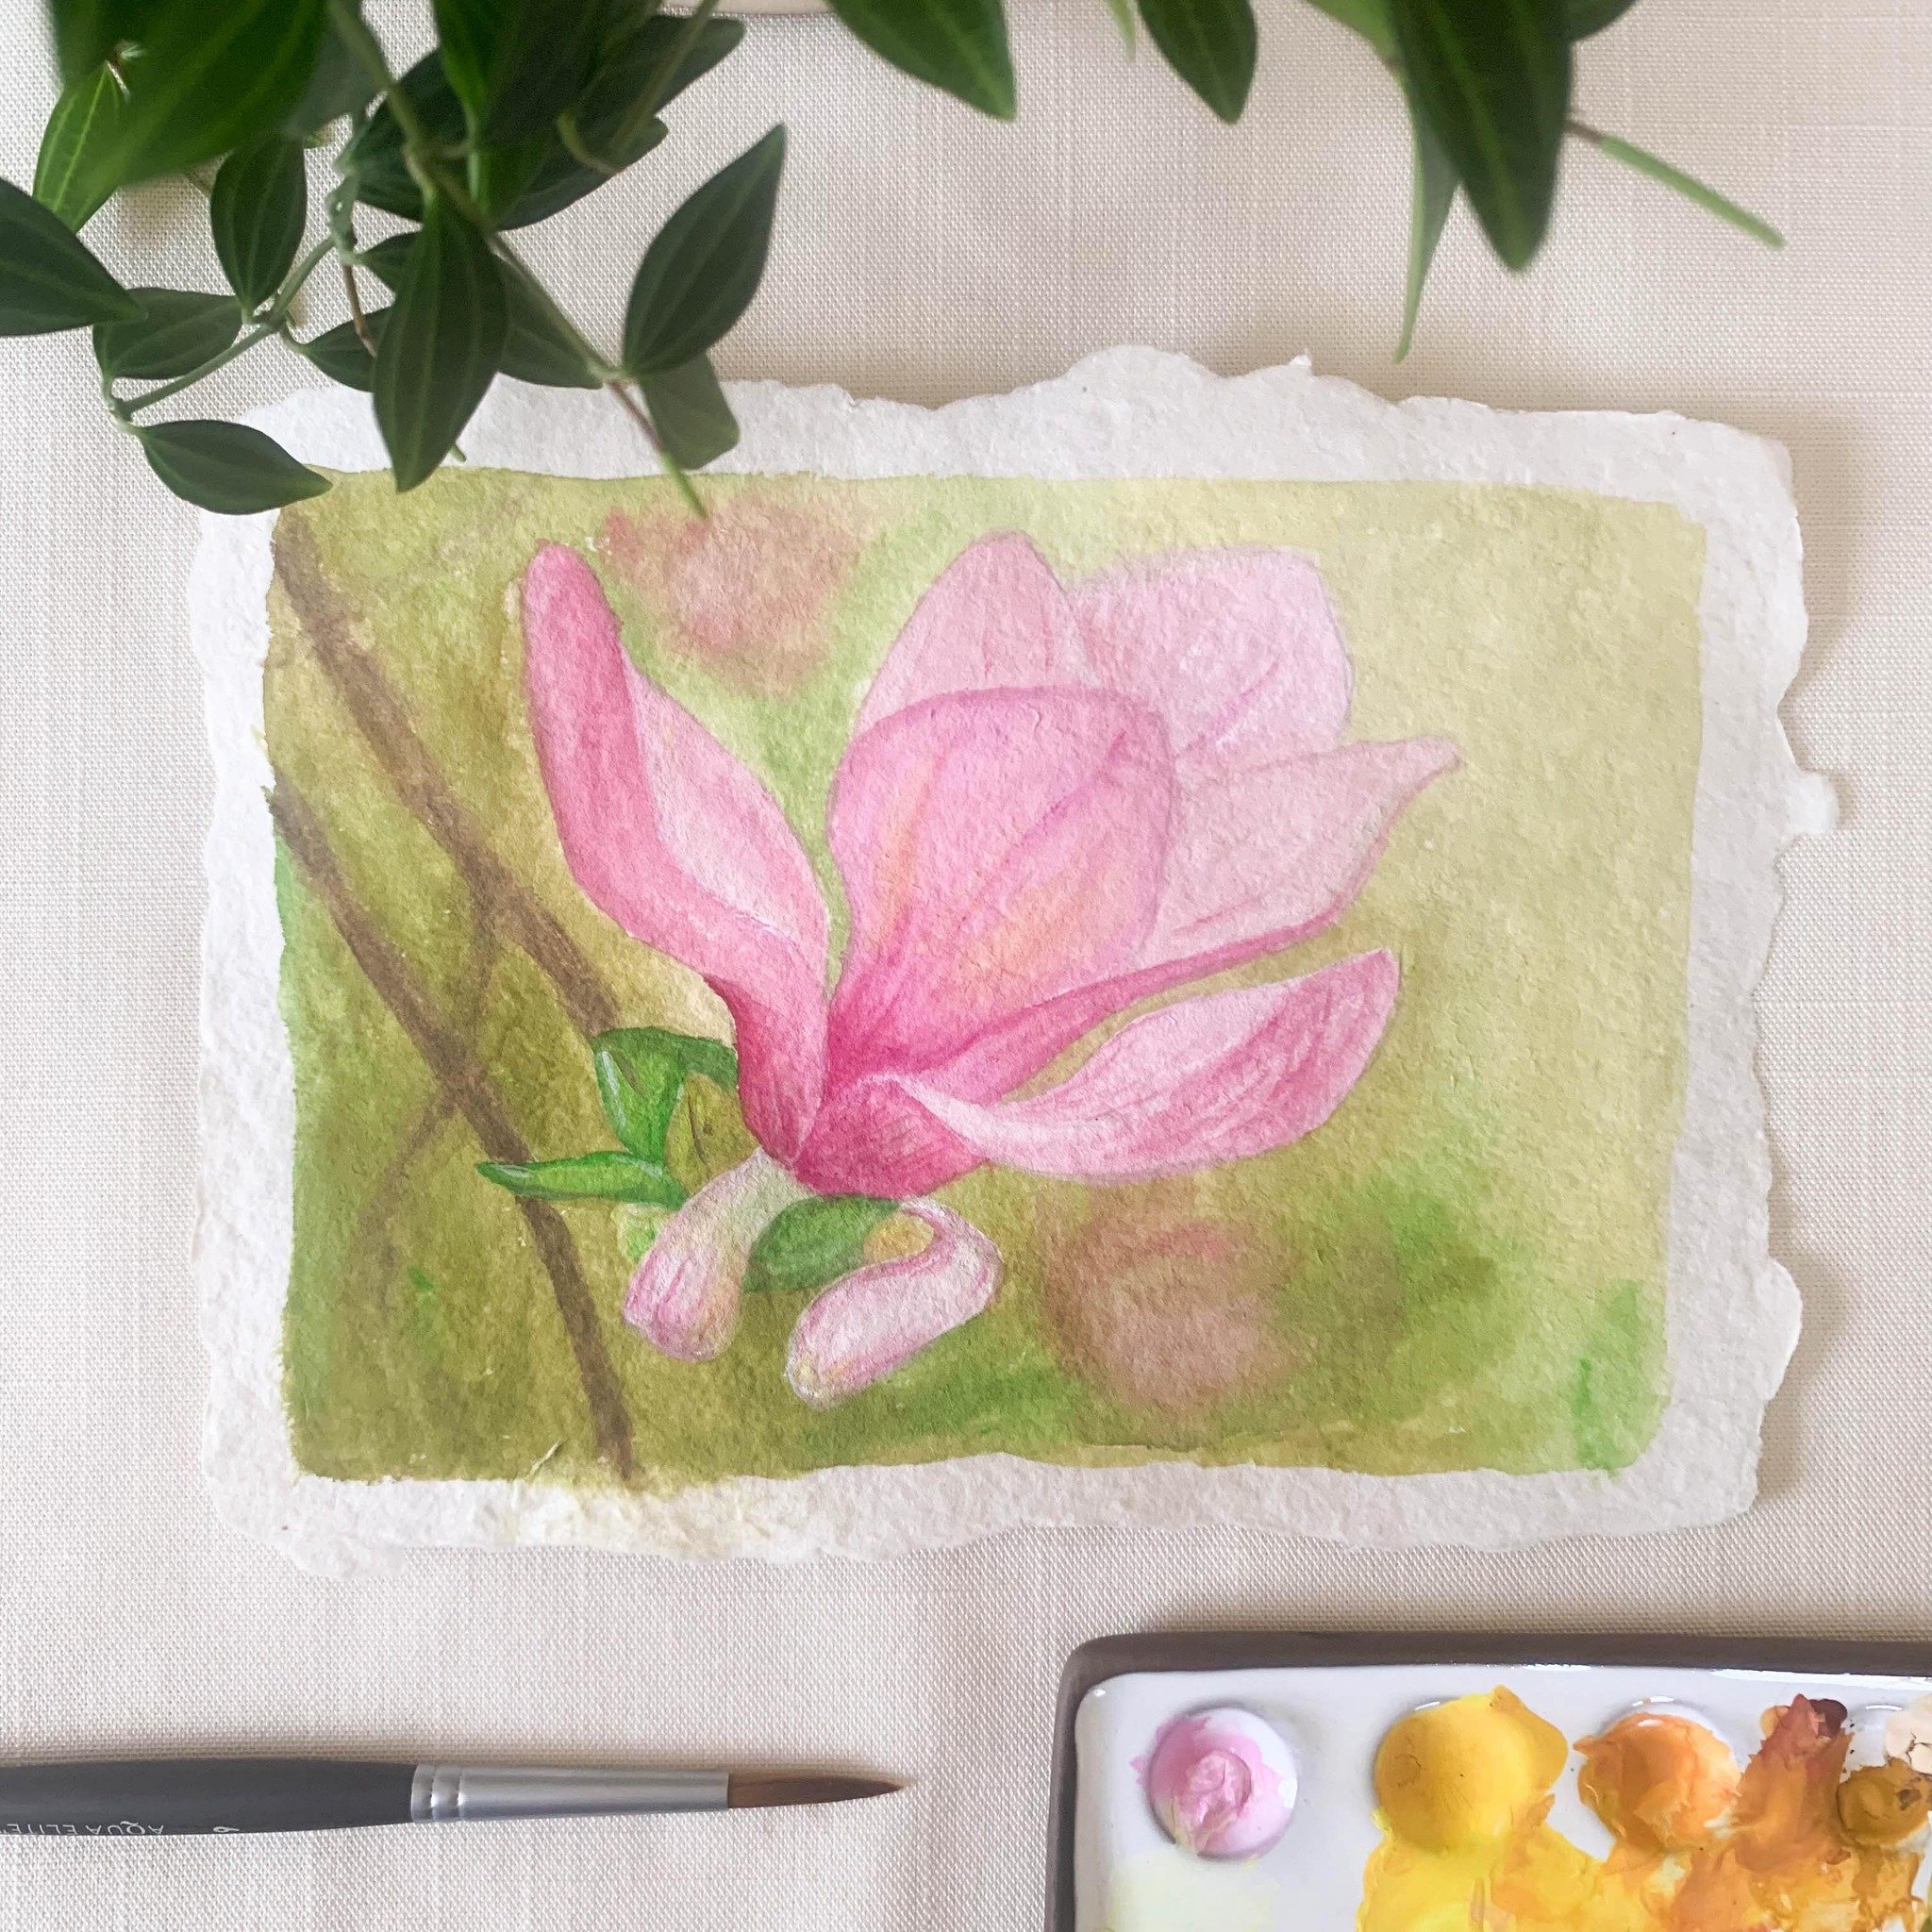 Blooming magnolia flower painted in gouache on handmade paper.
#magnoliaflower #magnoliapainting #springflowers #springfever #blooming #gouachepainting #gouacheart #handmadepaper #loveofflowers #inspiredbypetals #painting #willowglenstationery